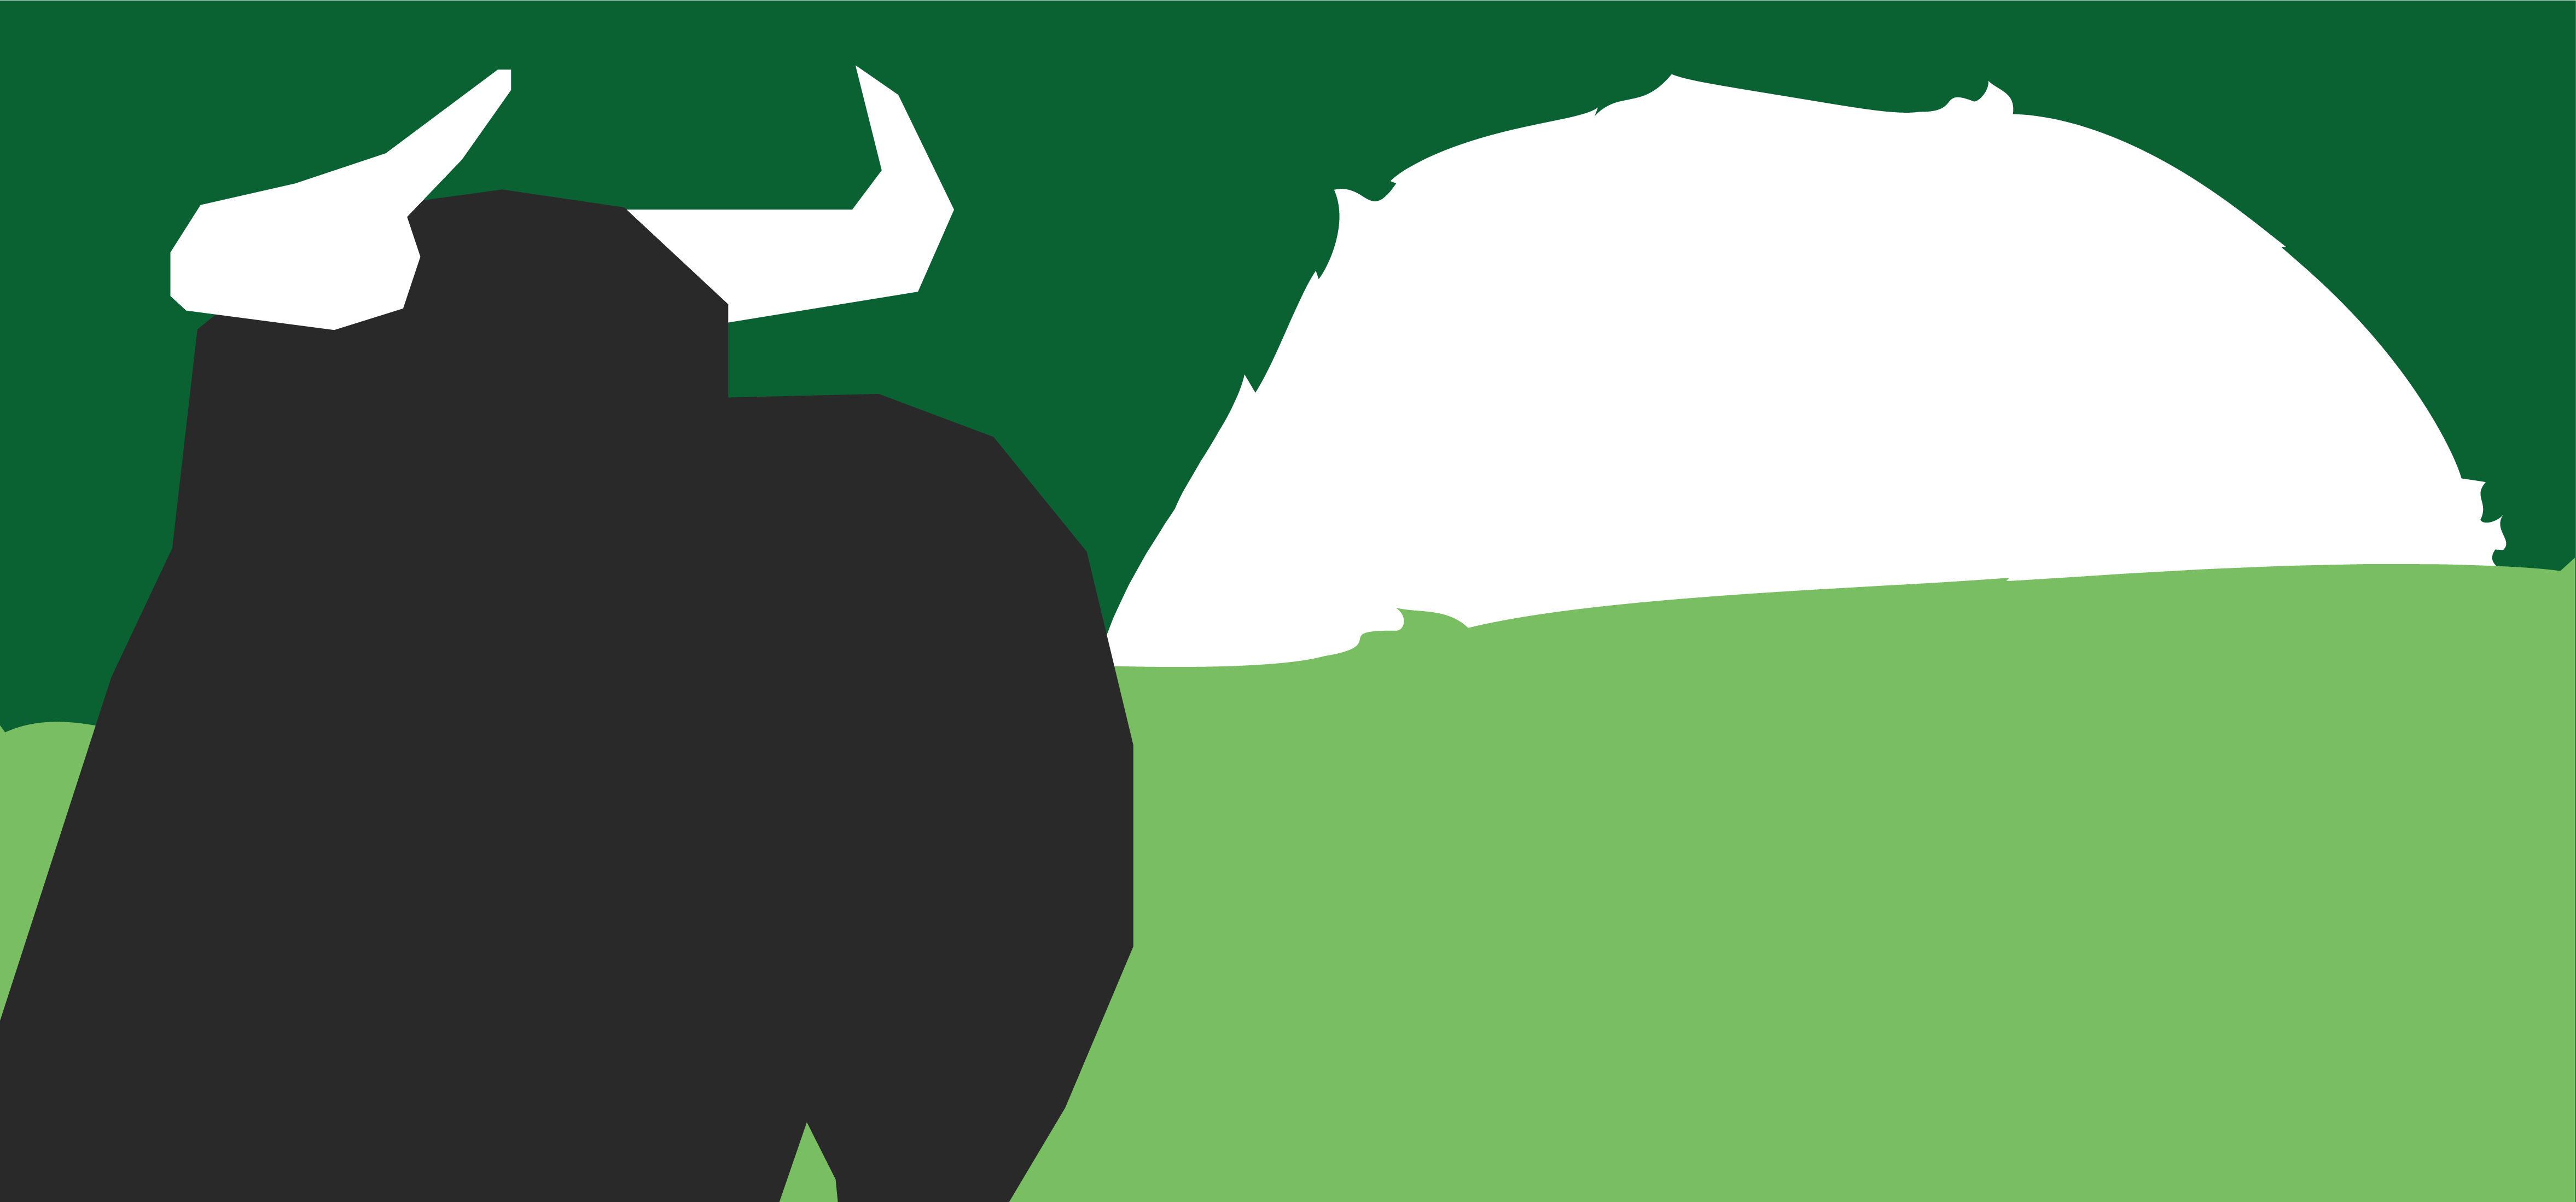 Stylised representation of a black bull with horns, against a green and white background, reminiscent of the cover of Ernest Hemingway’s novel, The Sun Also Rises